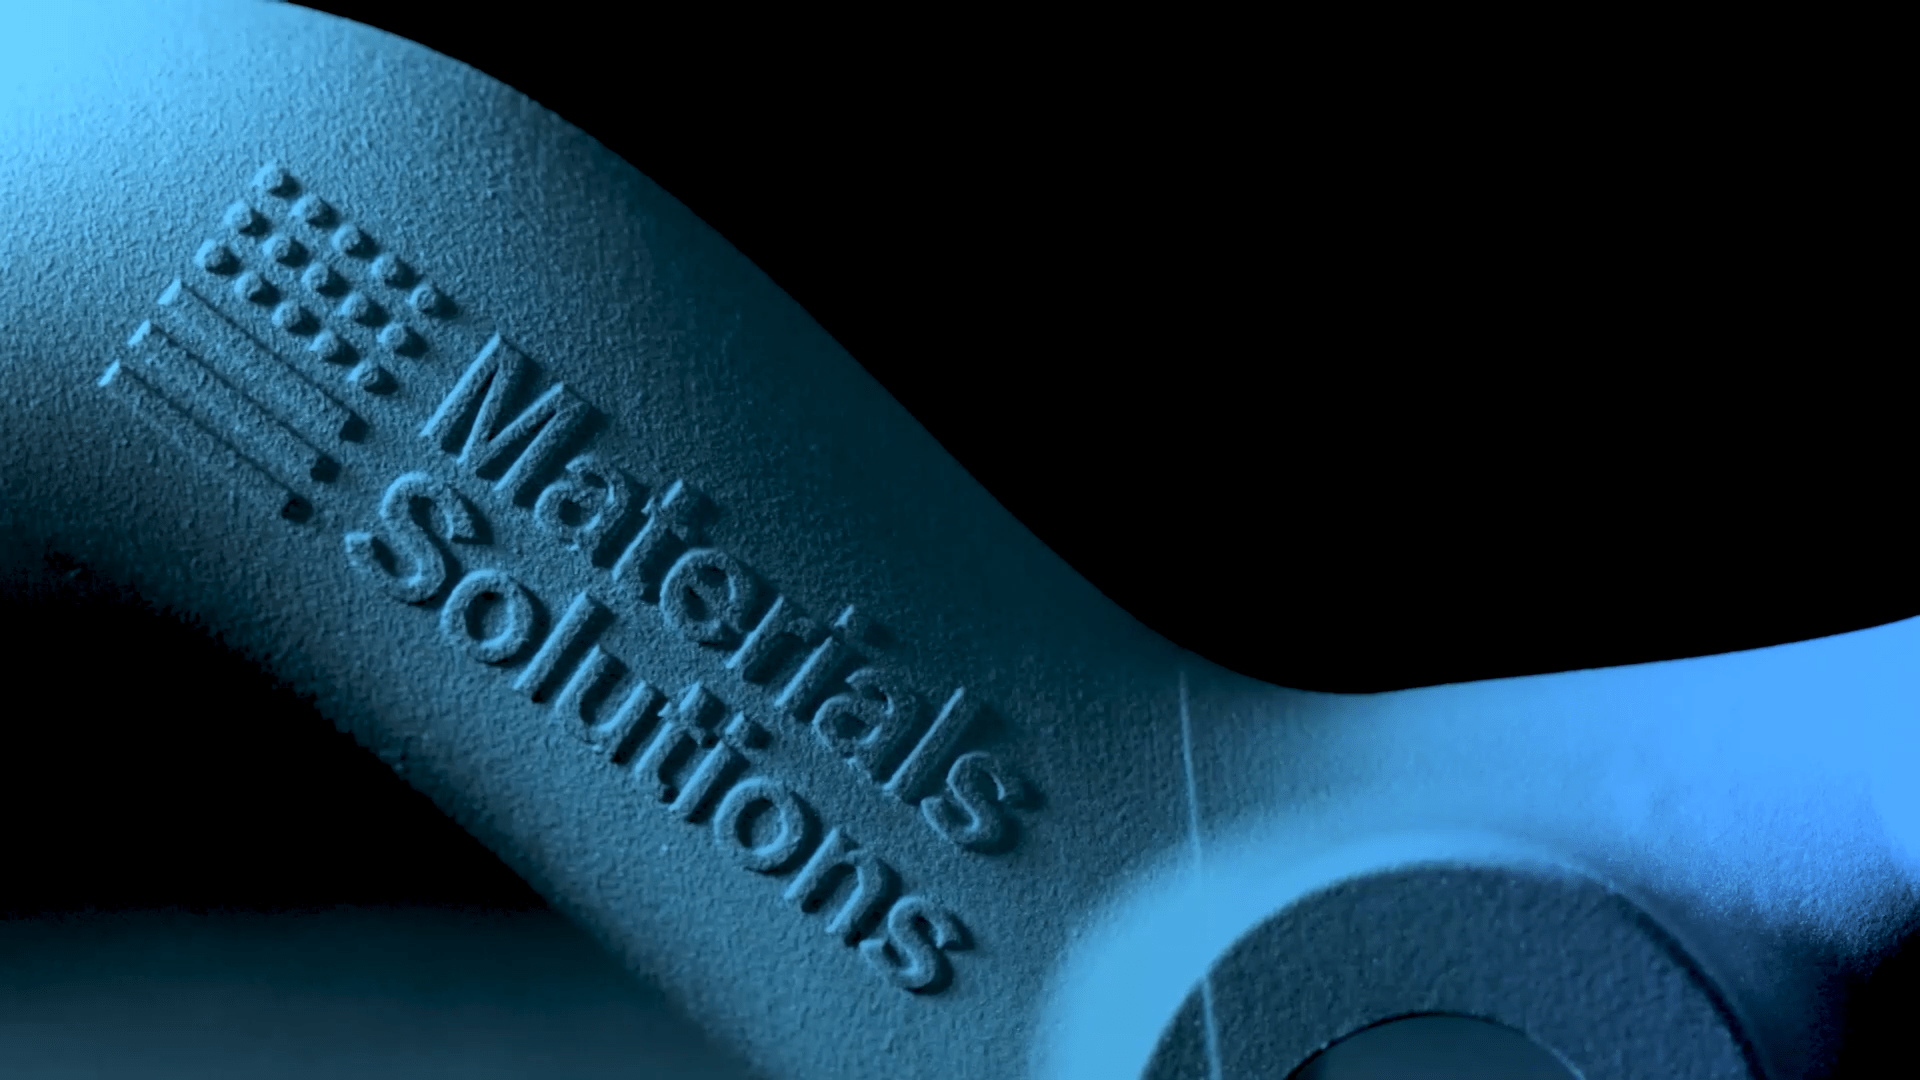 Materials Solutions: Additively Manufactured Metal Parts with Quality Guarantee